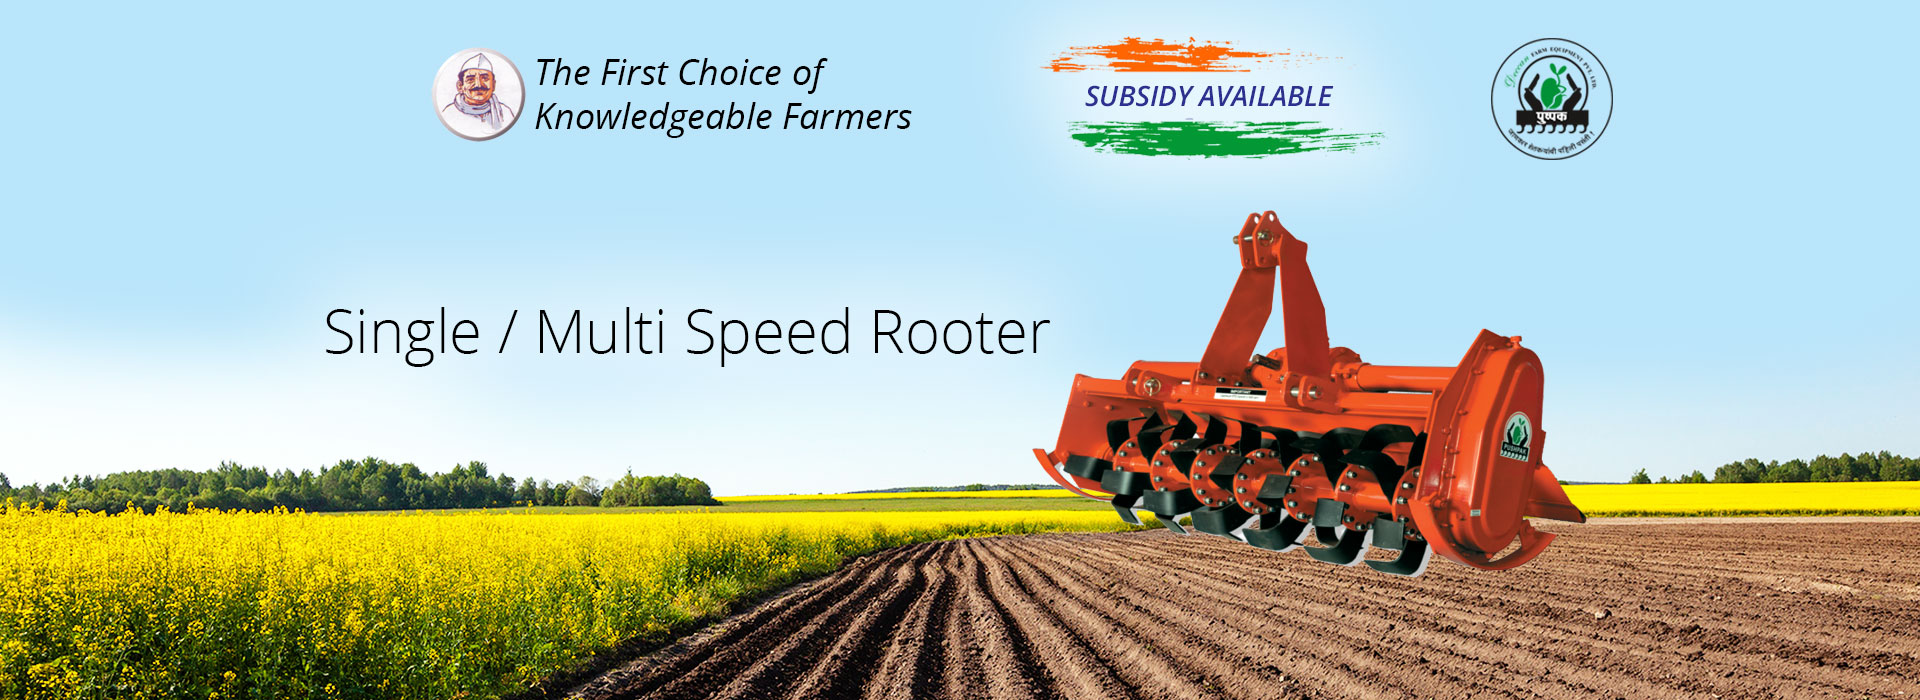 agriculture implements and agriculture machinery manufacturers in india : deccan farm equipment pvt ltd